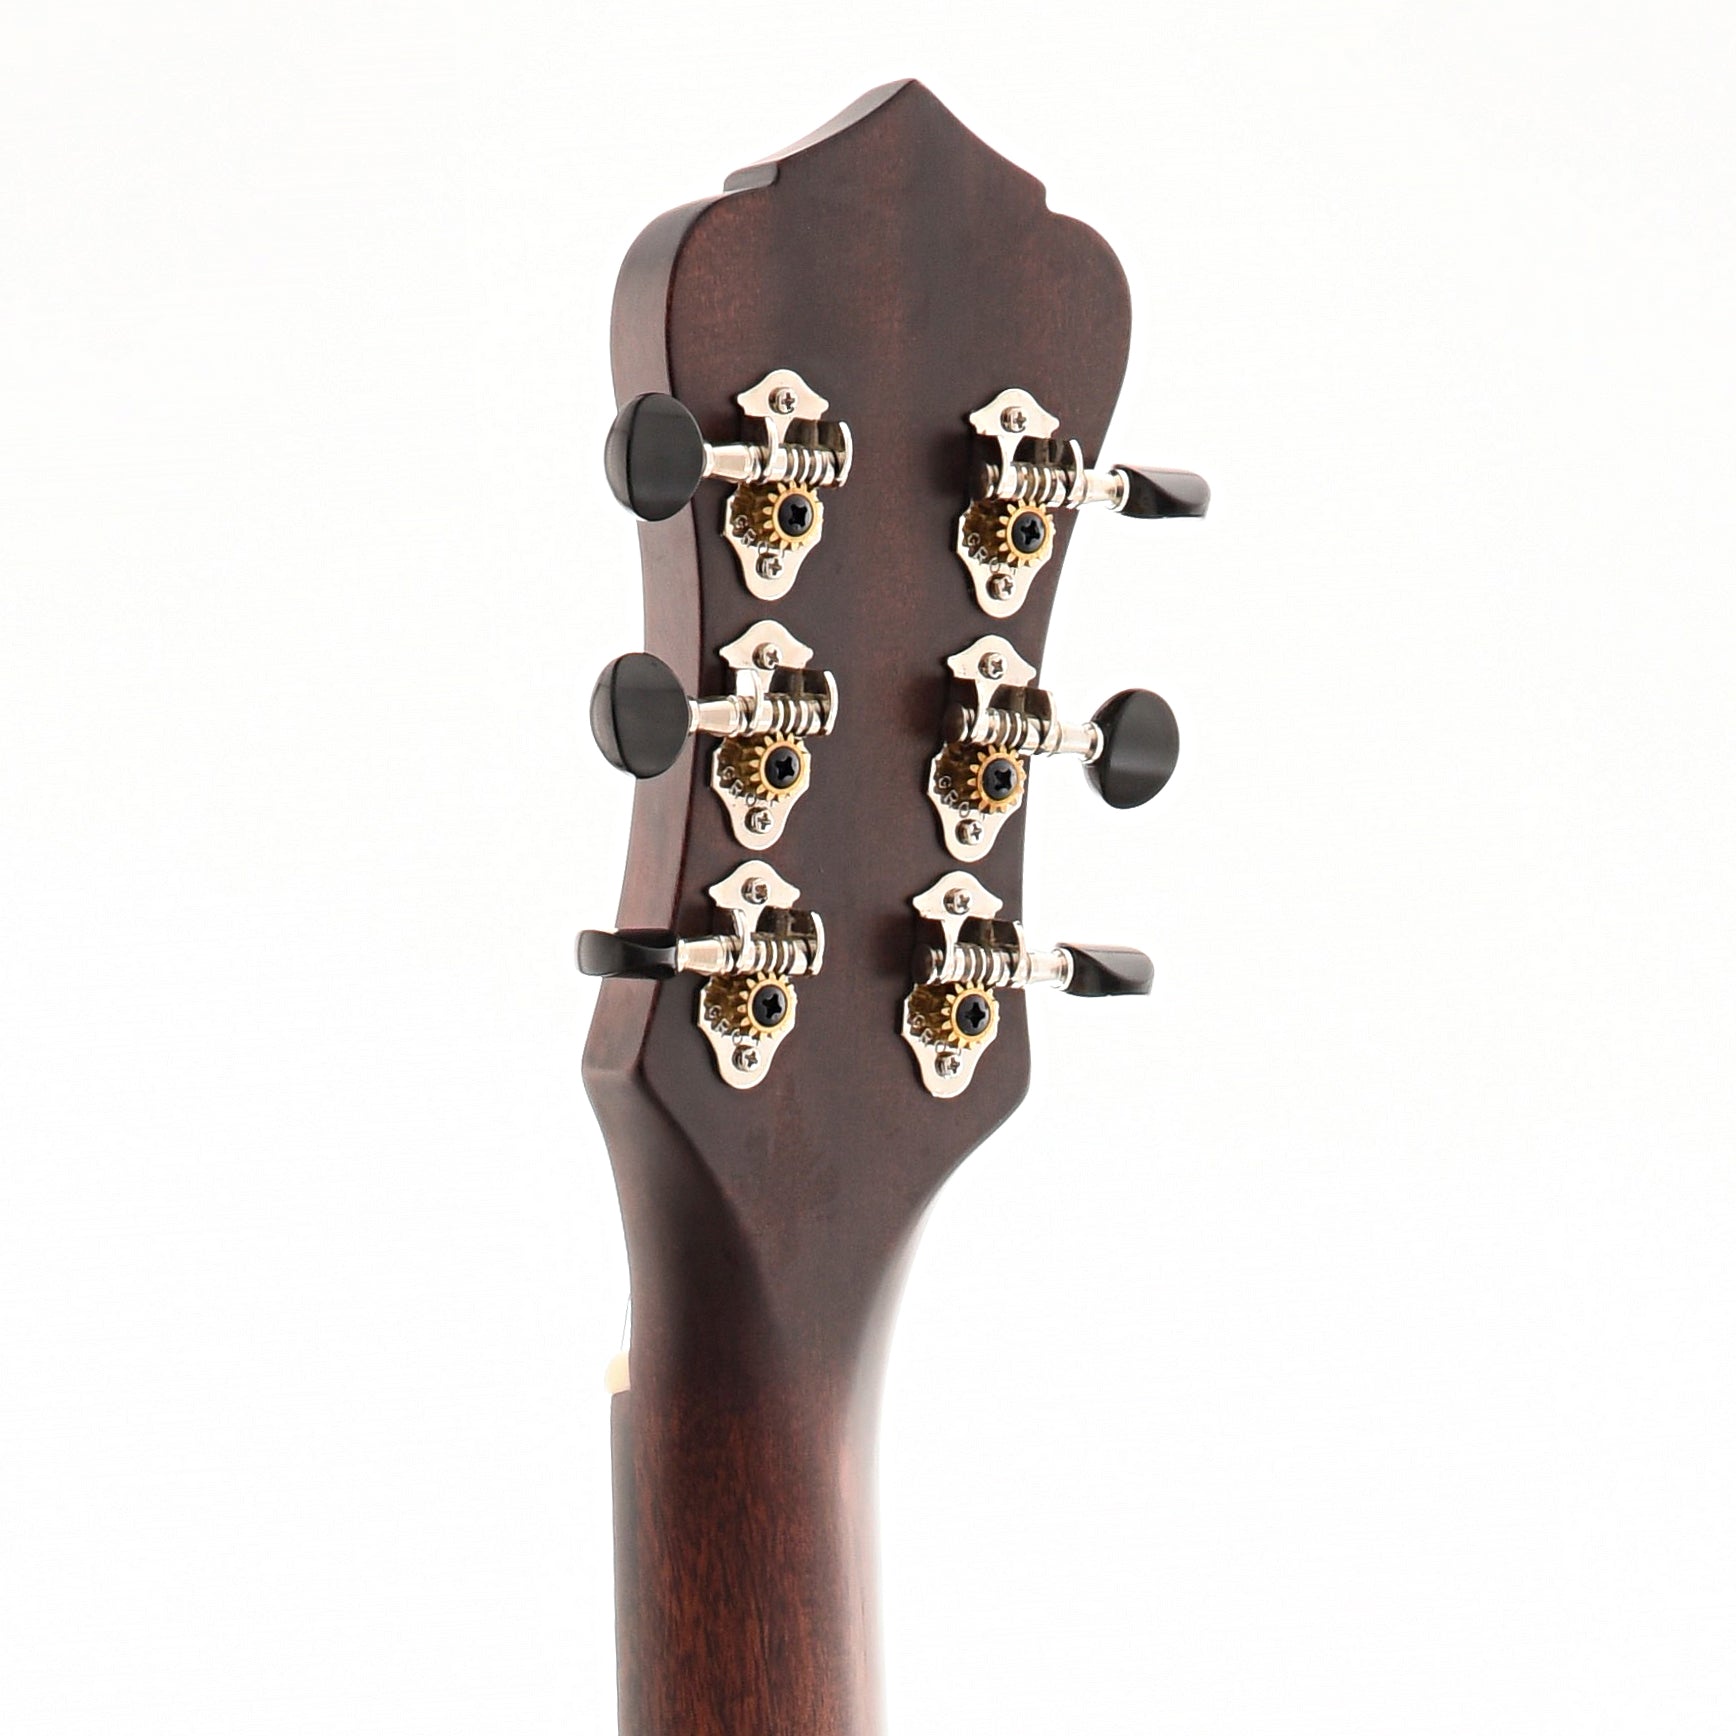 Back Headstock of Recording King Limited Edition "Swamp Dog" Resonator Guitar